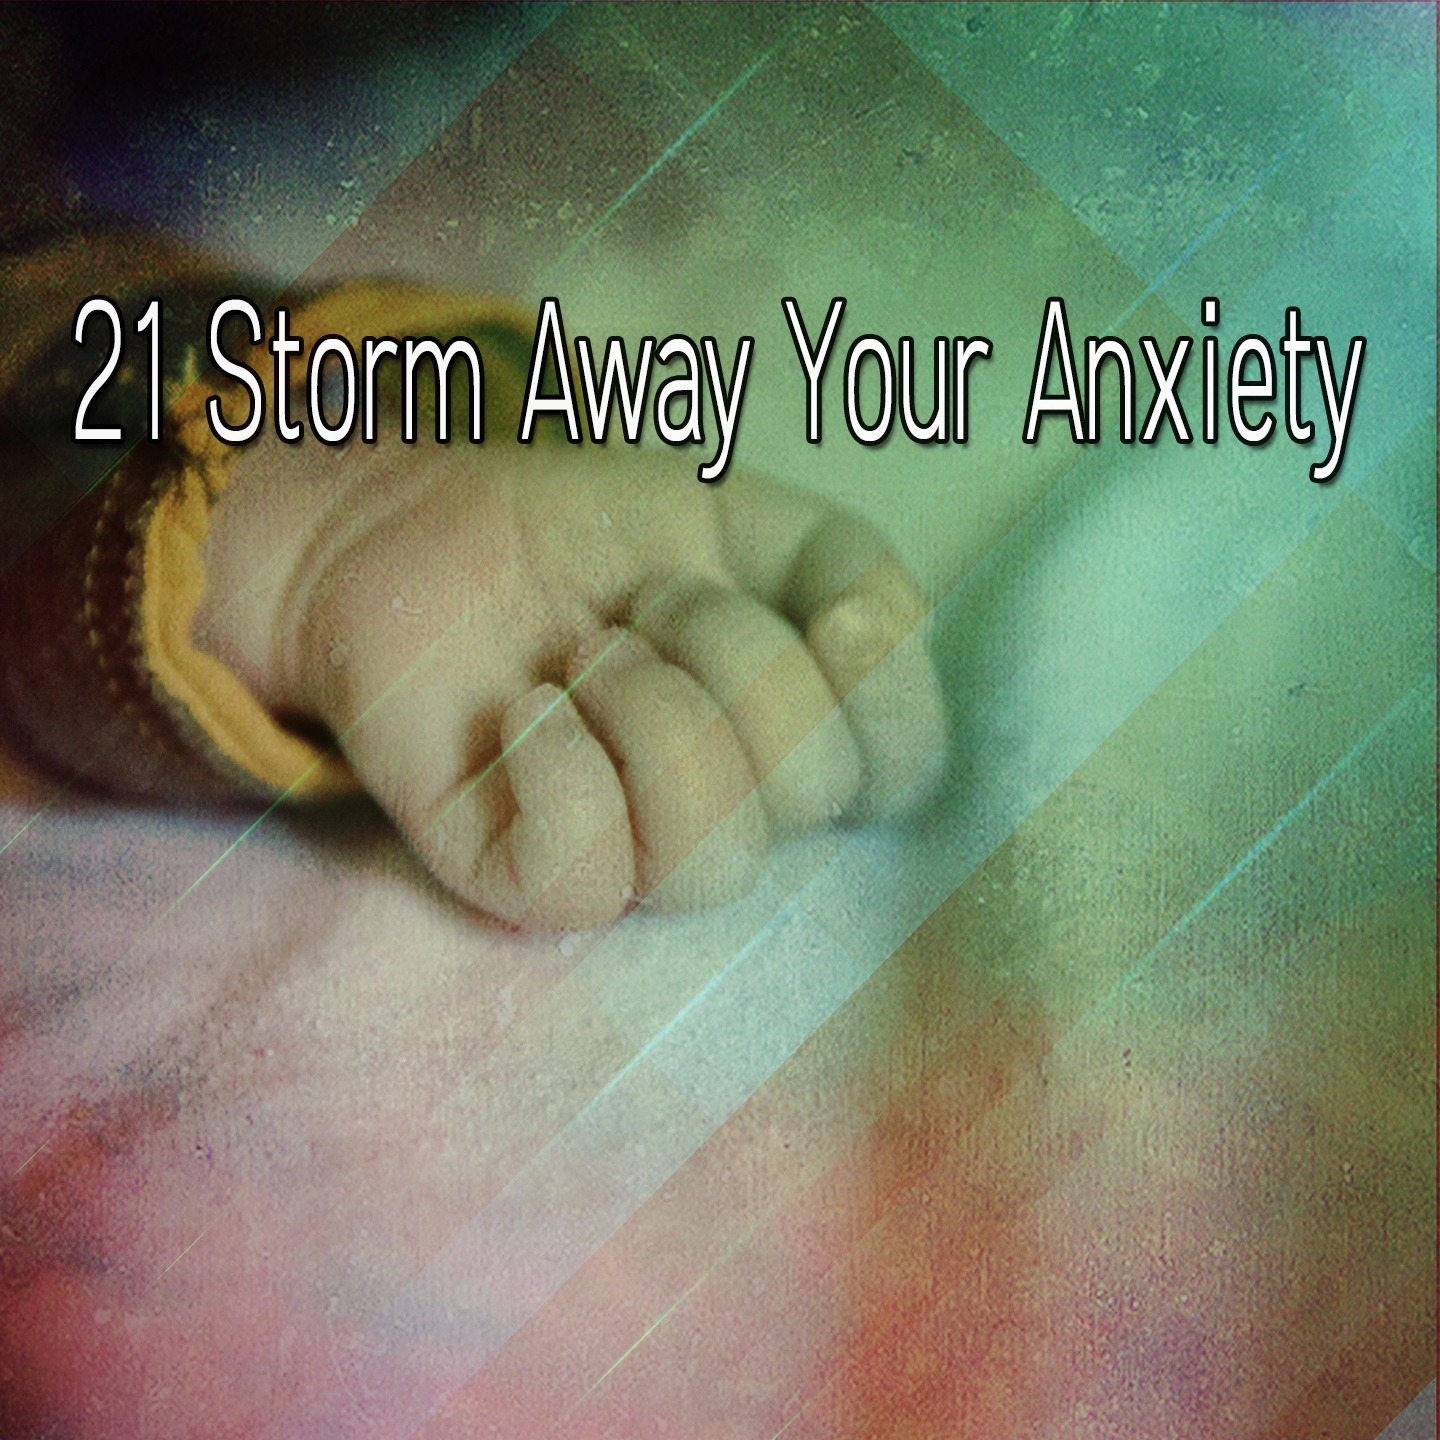 21 Storm Away Your Anxiety